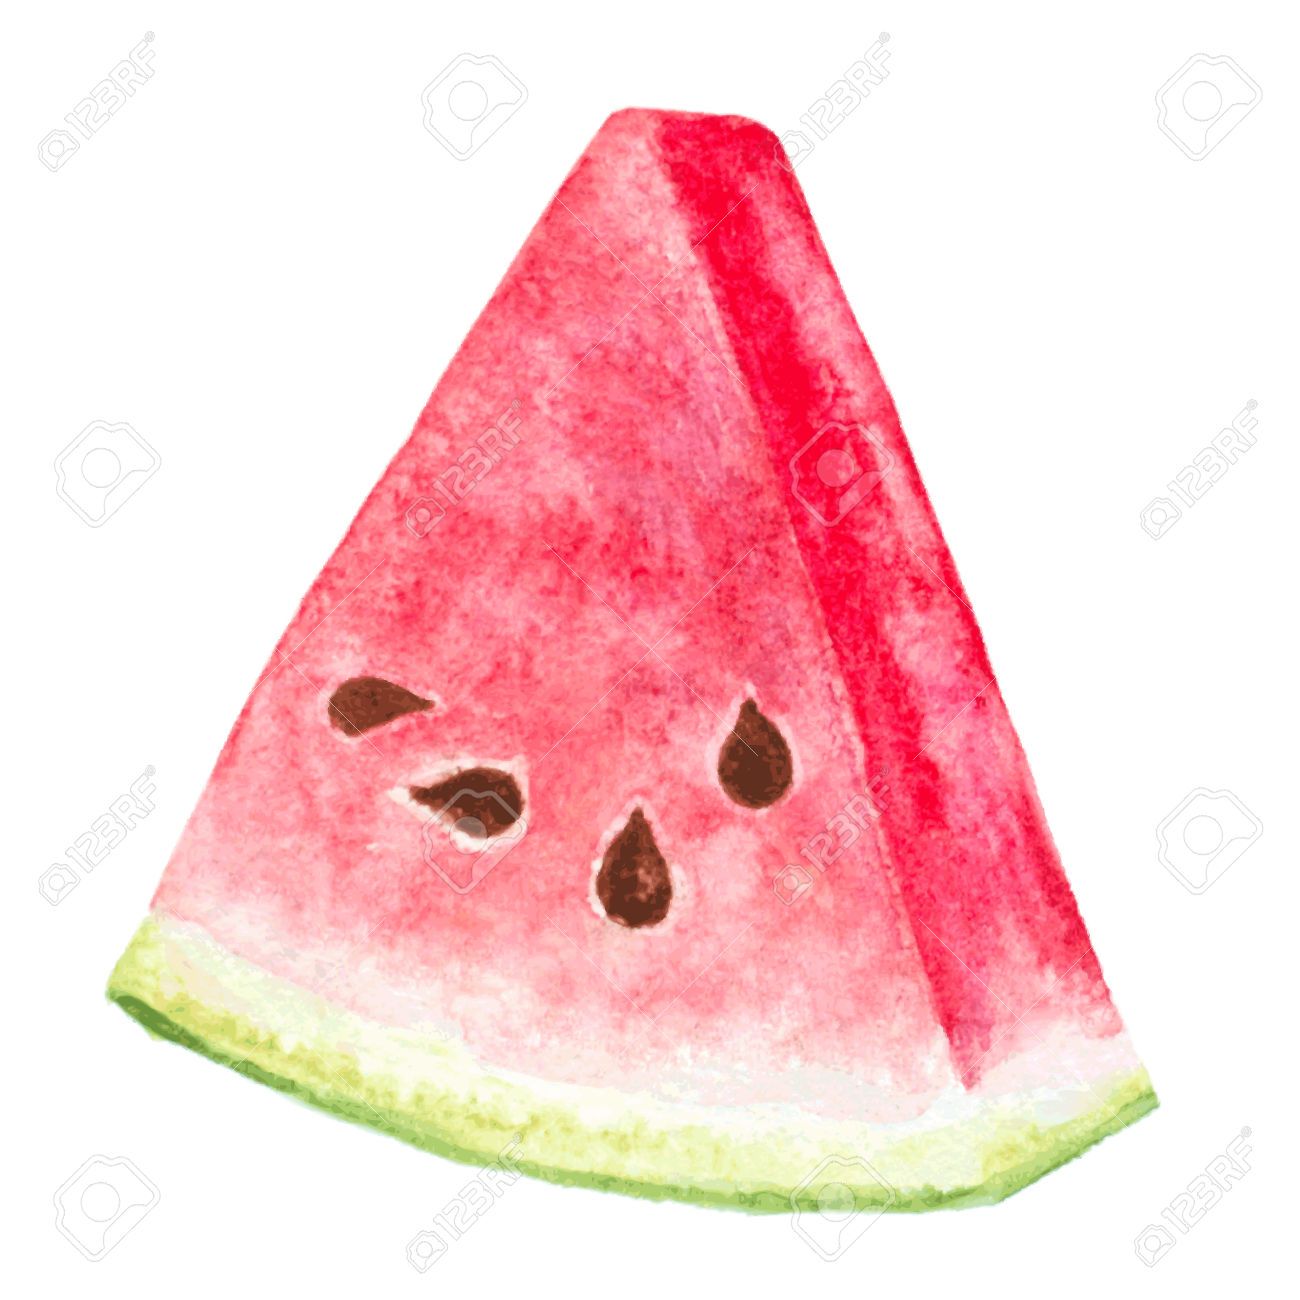 Stock vector printable images. Watermelon clipart watercolor